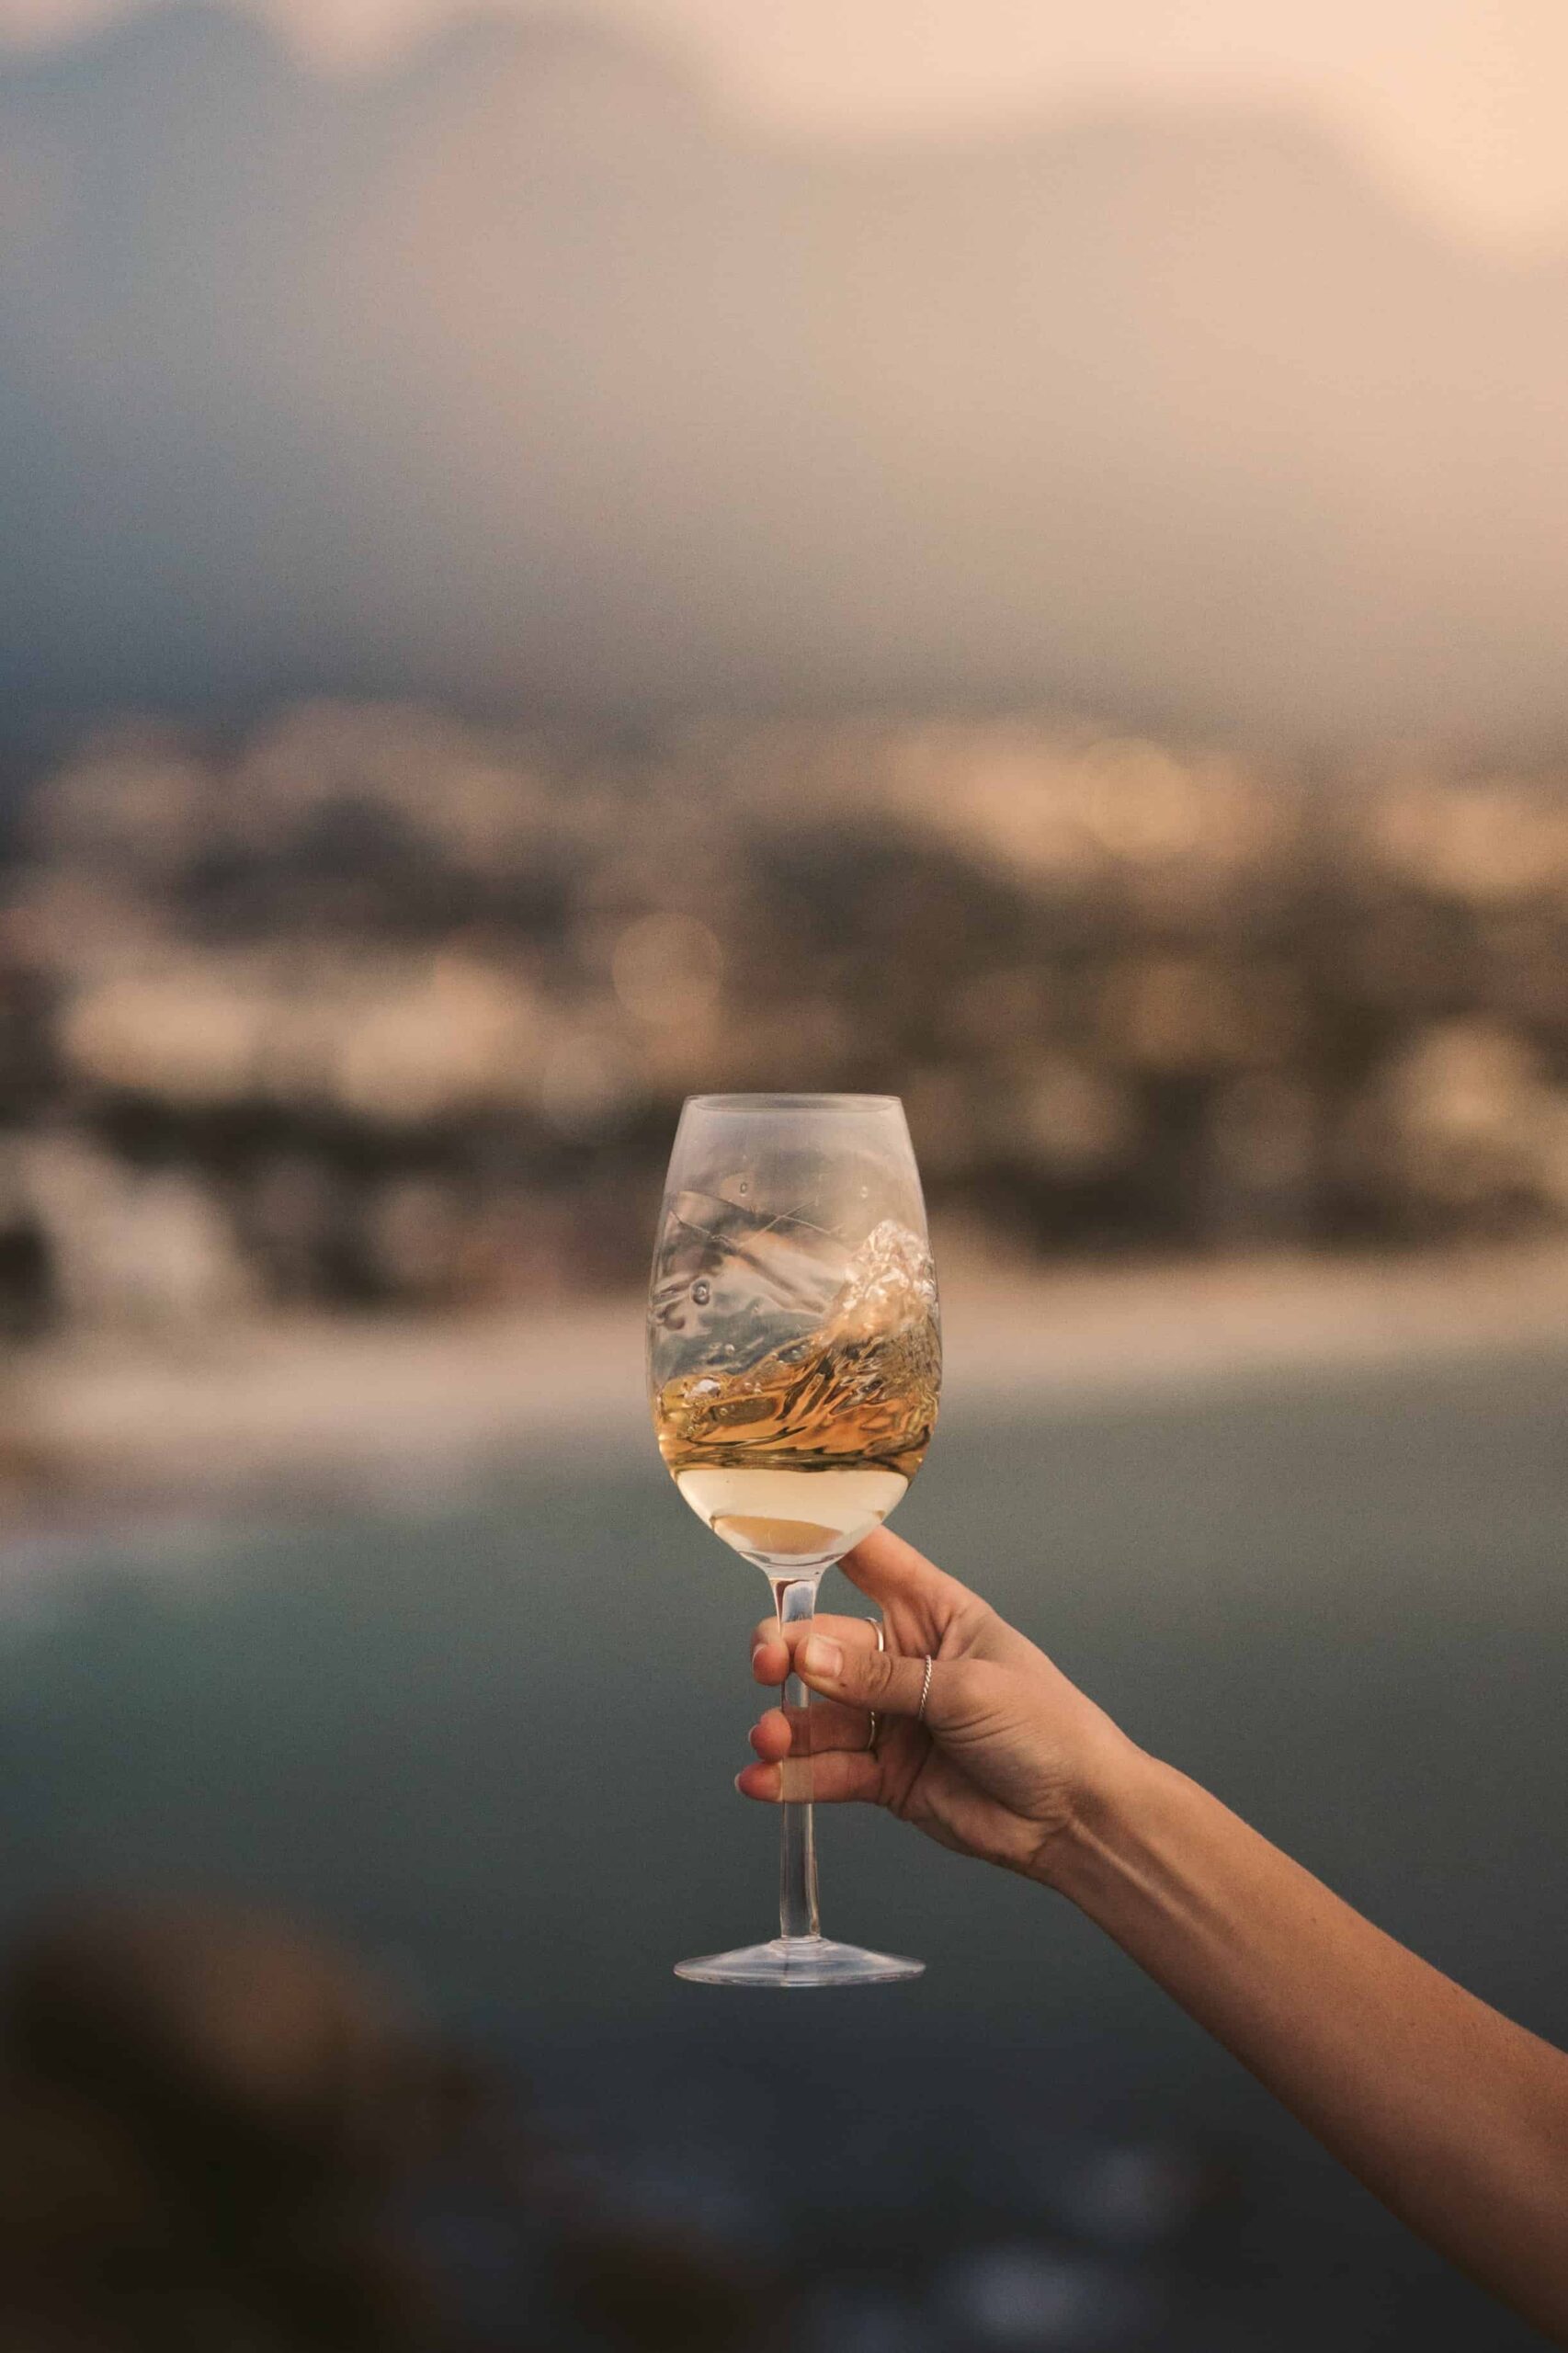 A person swirling a wine glass with the ocean in the background